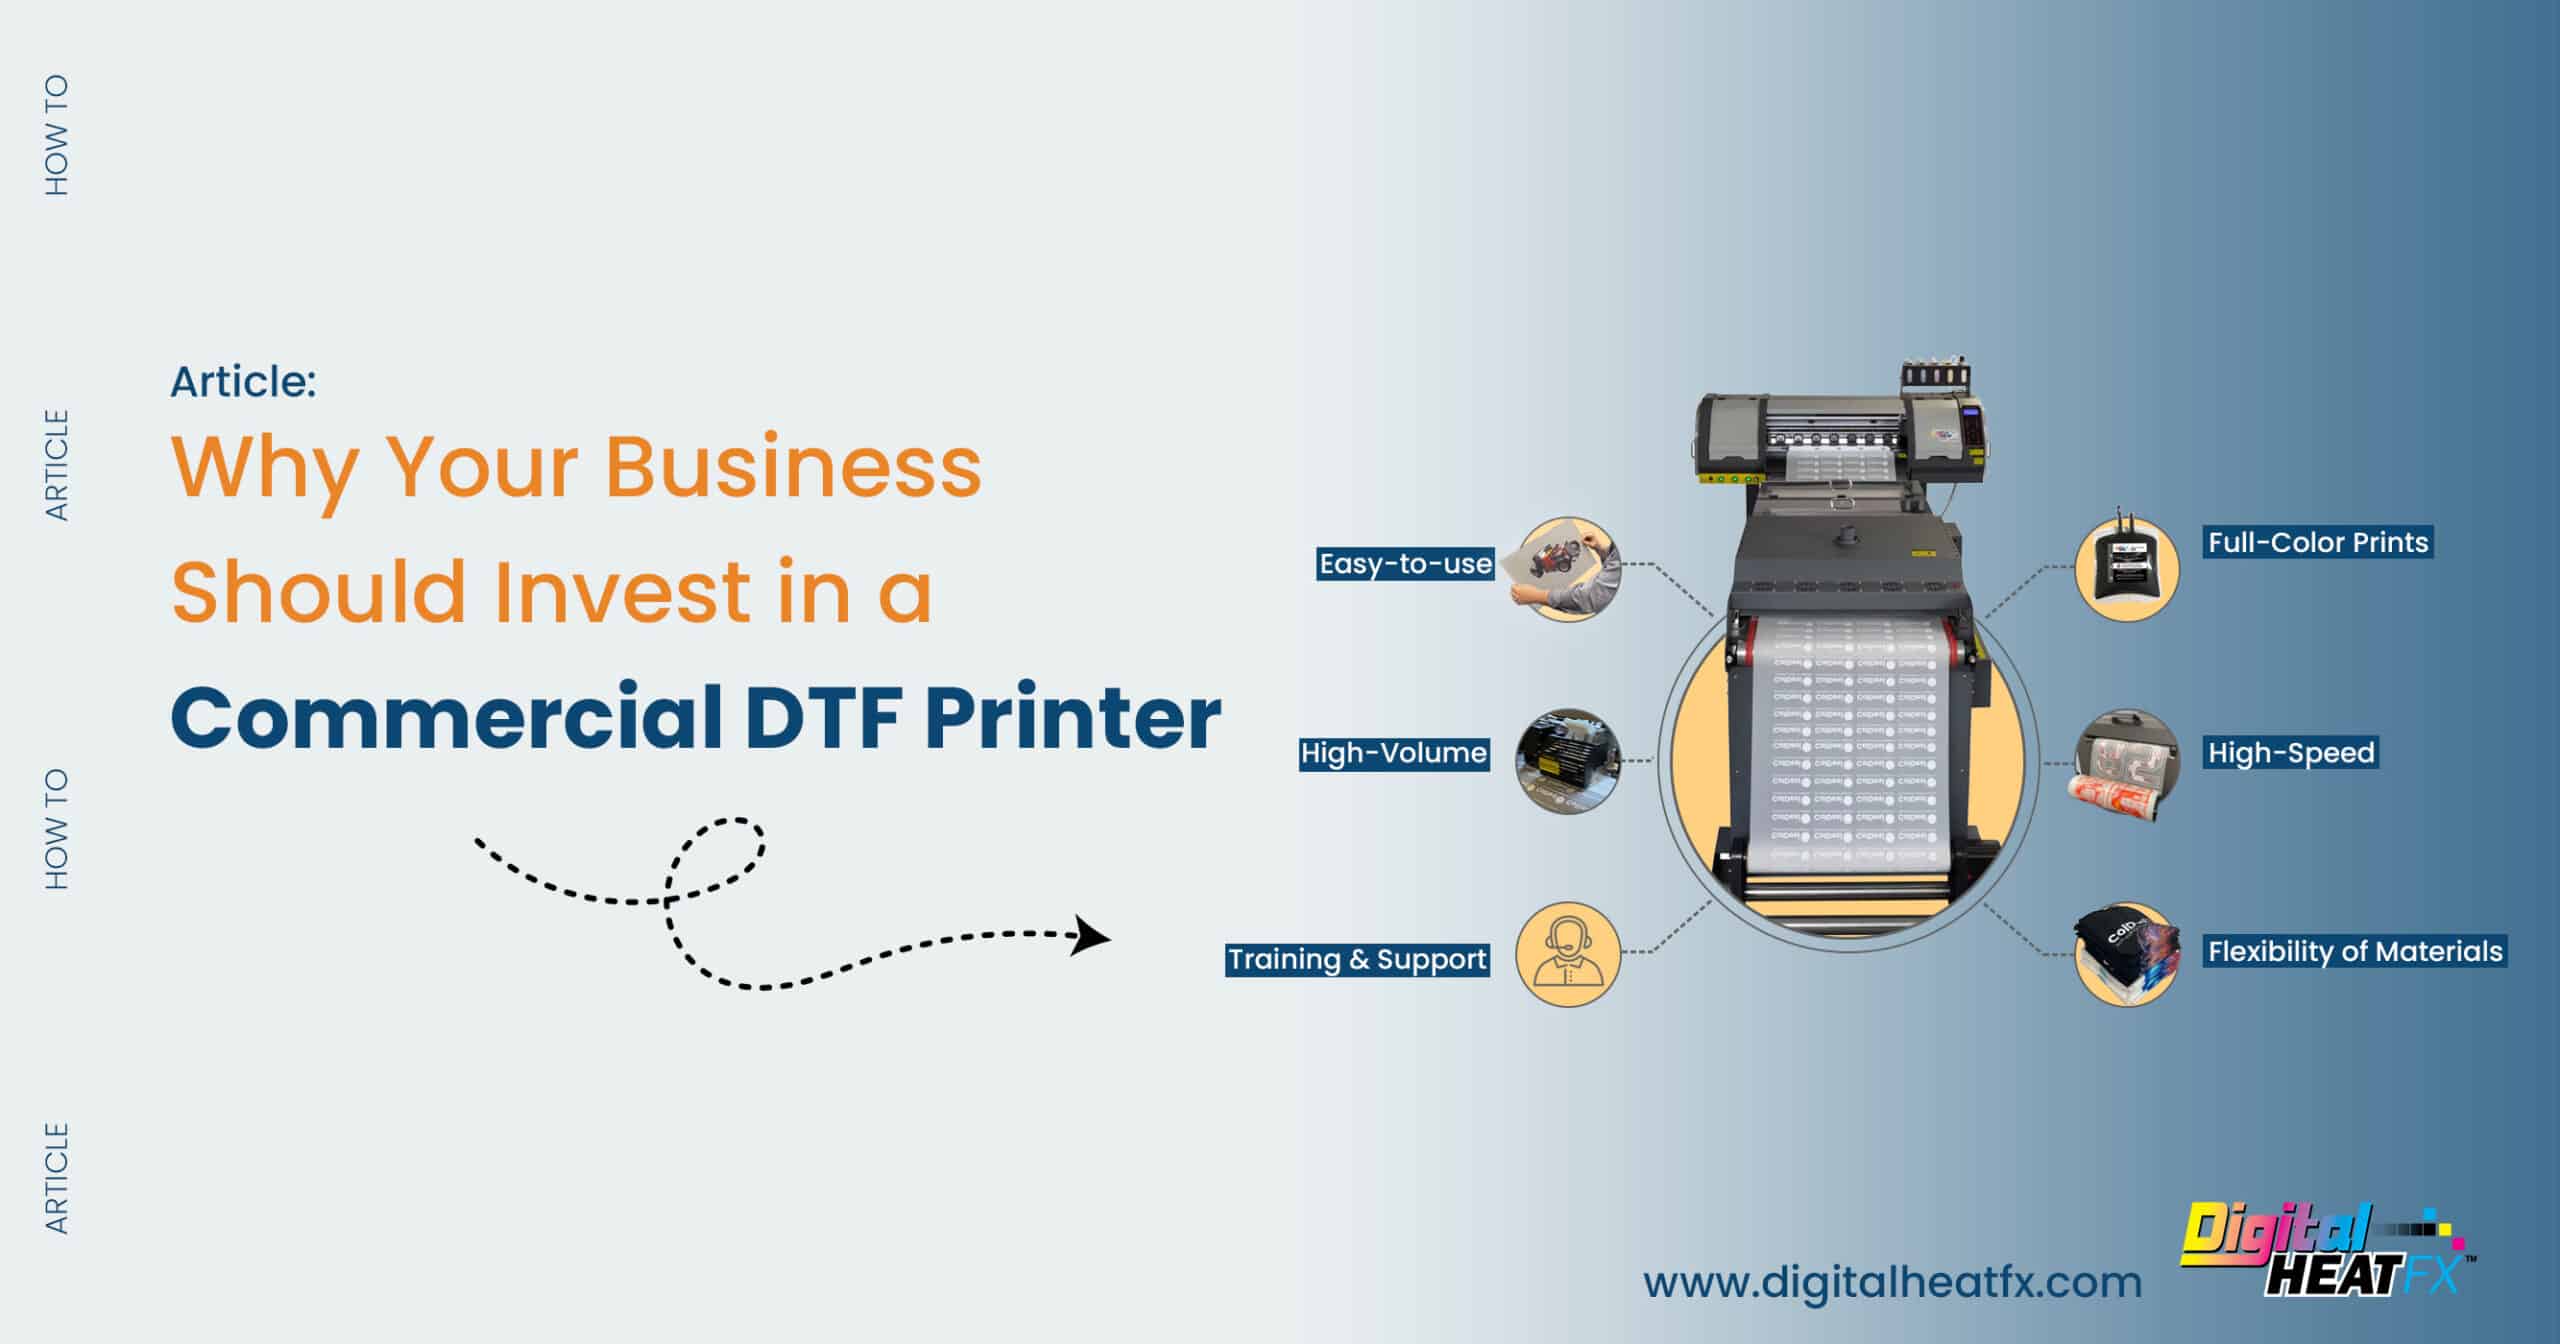 Why Your Business Should Invest in a Commercial DTF Printer.